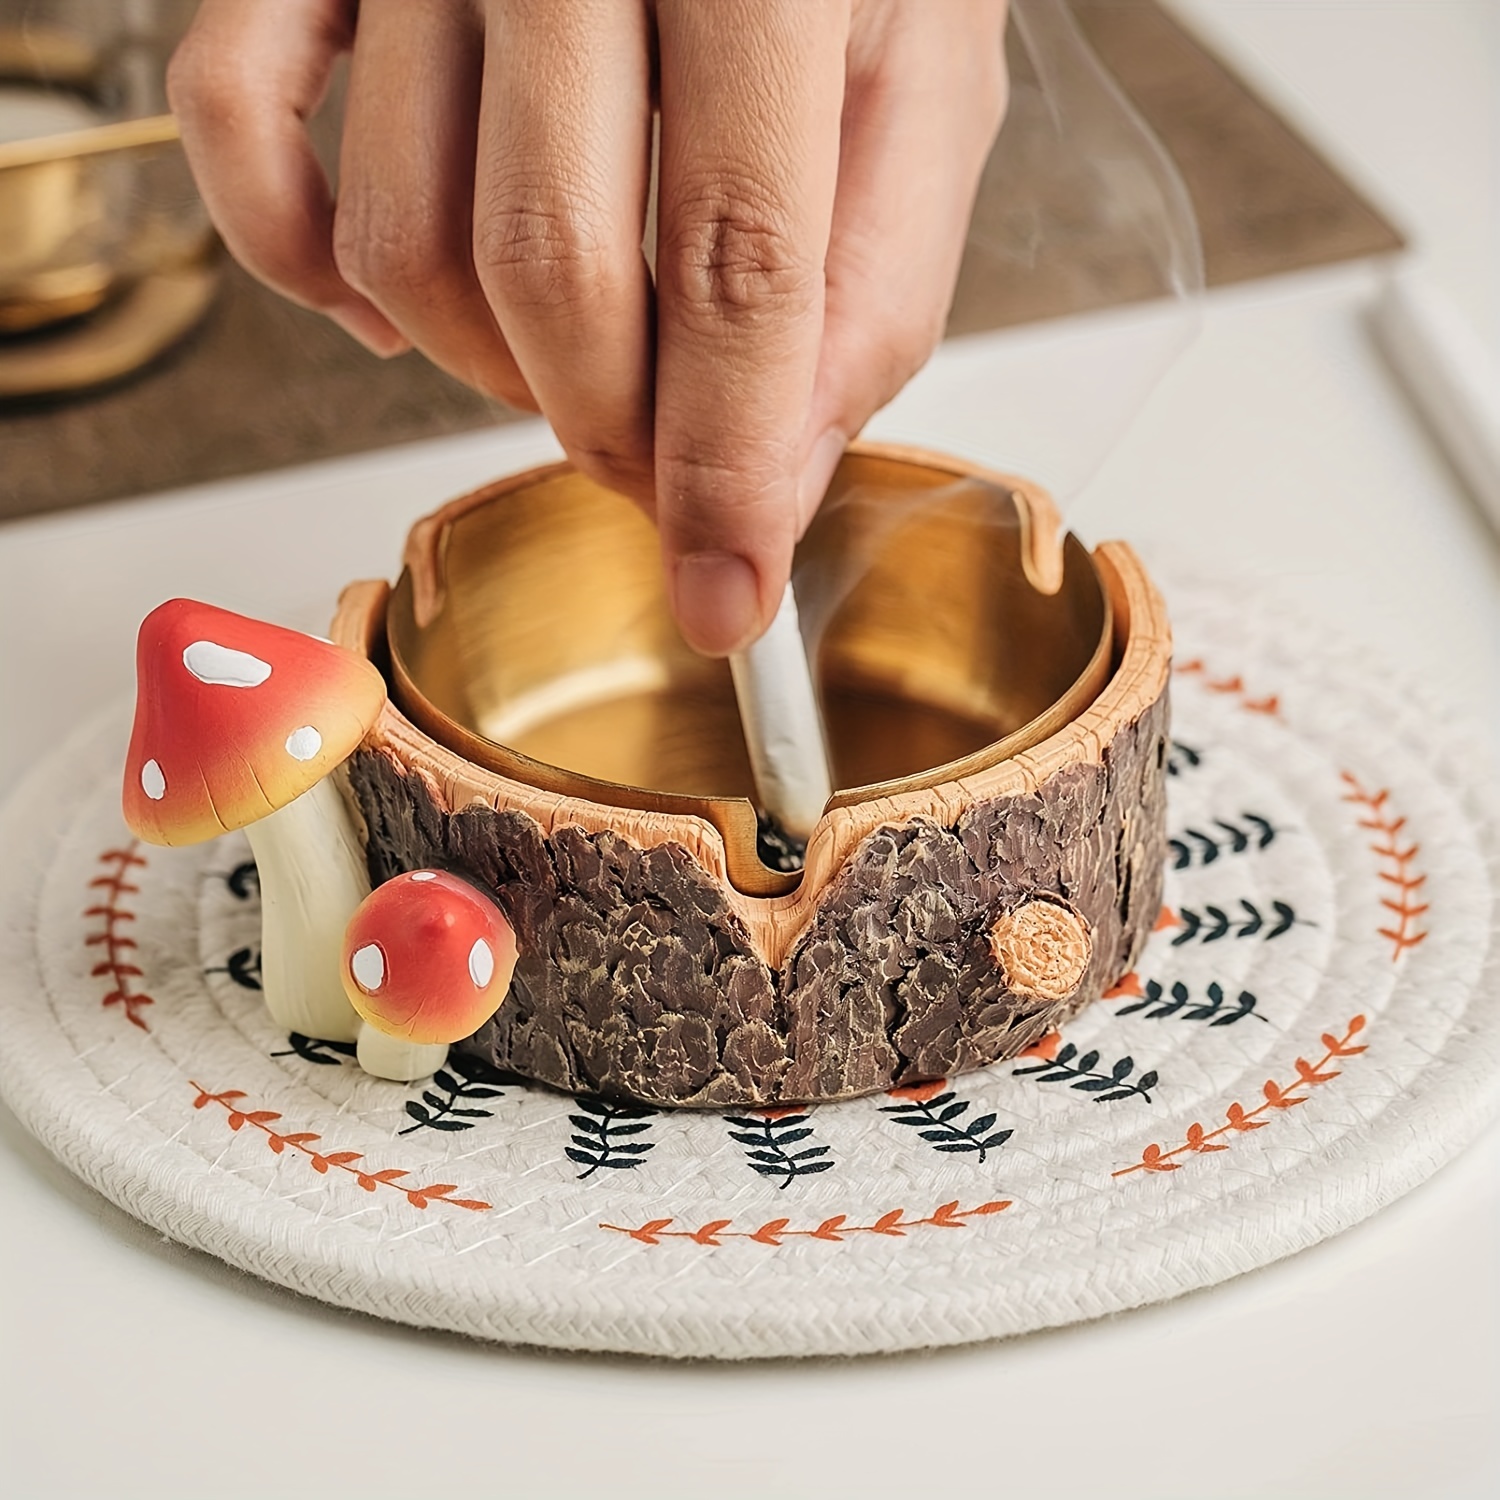 1pc, Ashtray, Cute Mushroom Ashtray With Stainless Steel Tray For Cigarette, Natural Resin Ash Tray For Indoor Or Outdoor Use, Ash Holder For Home And Garden Decor, Smoking Accessaries, Chrismas Gifts, Halloween Gifts